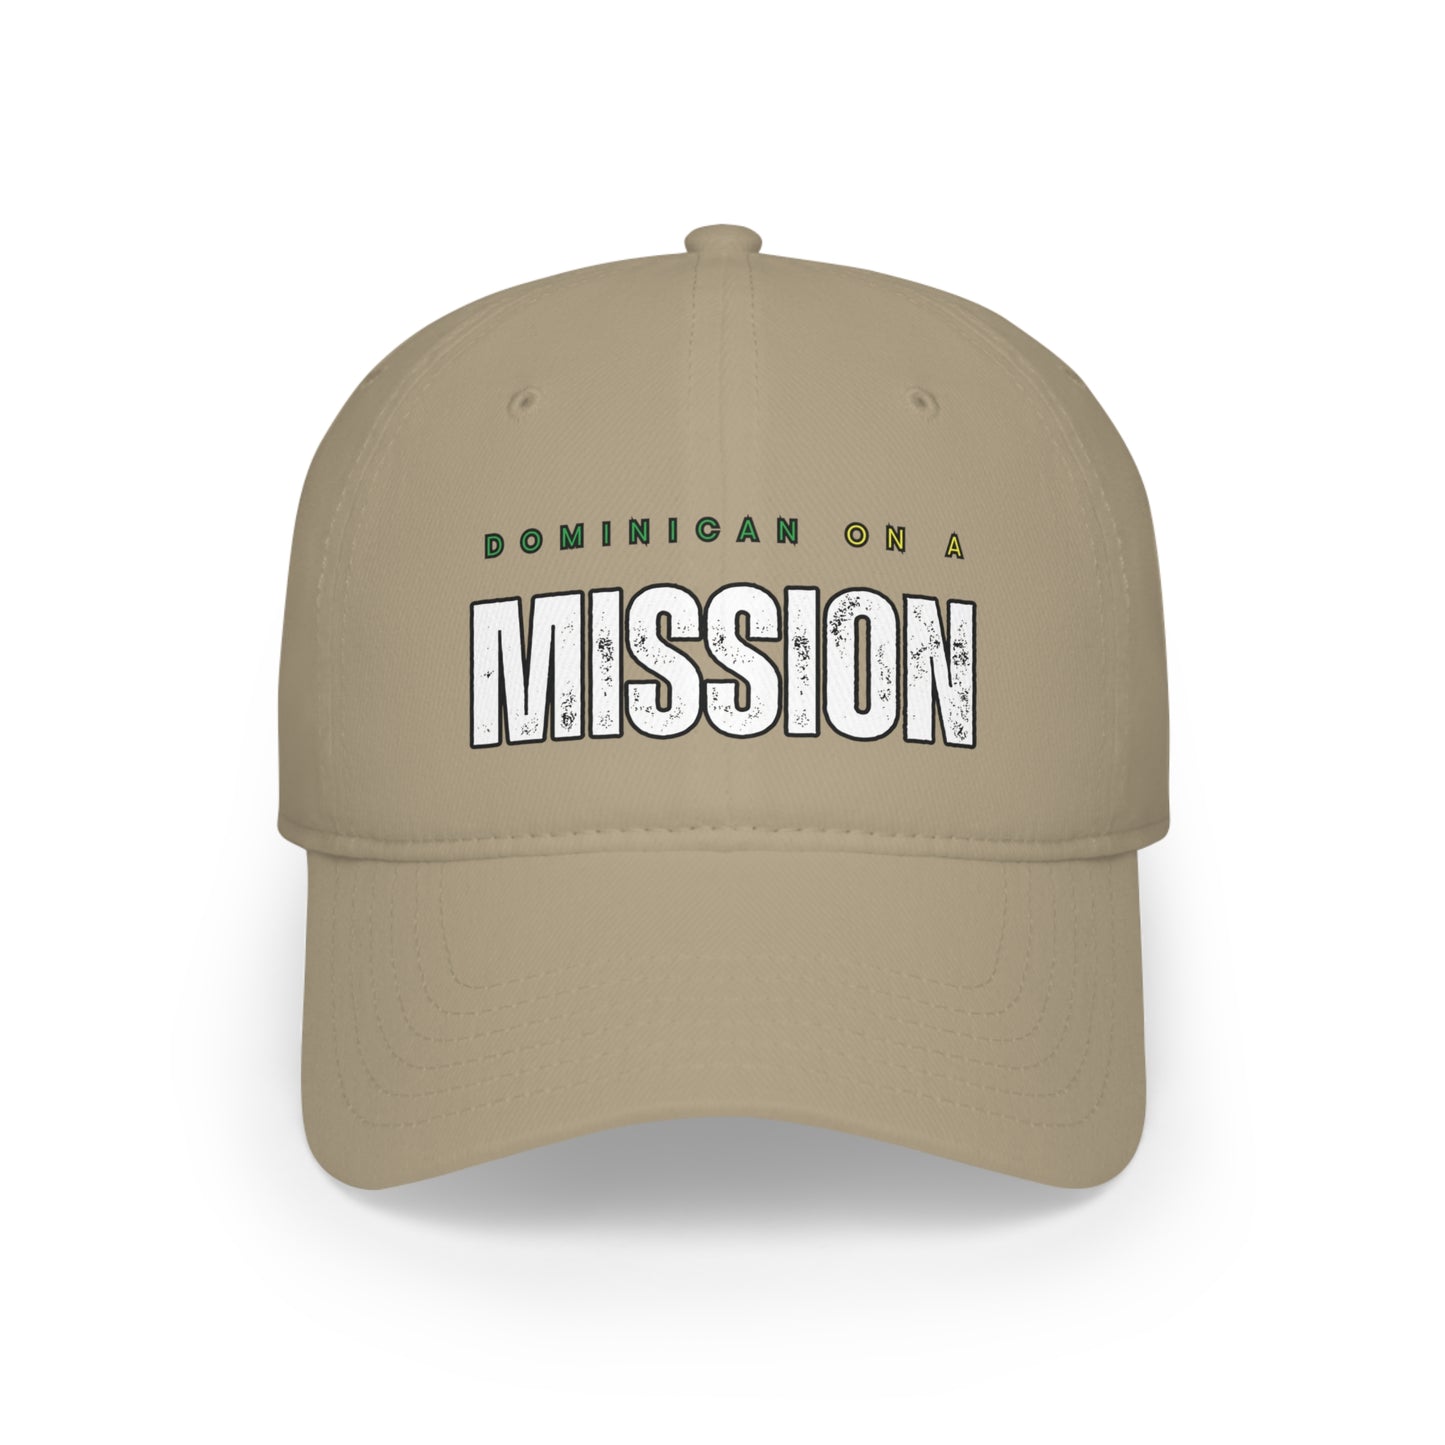 Dominican on a Mission Profile Baseball Cap